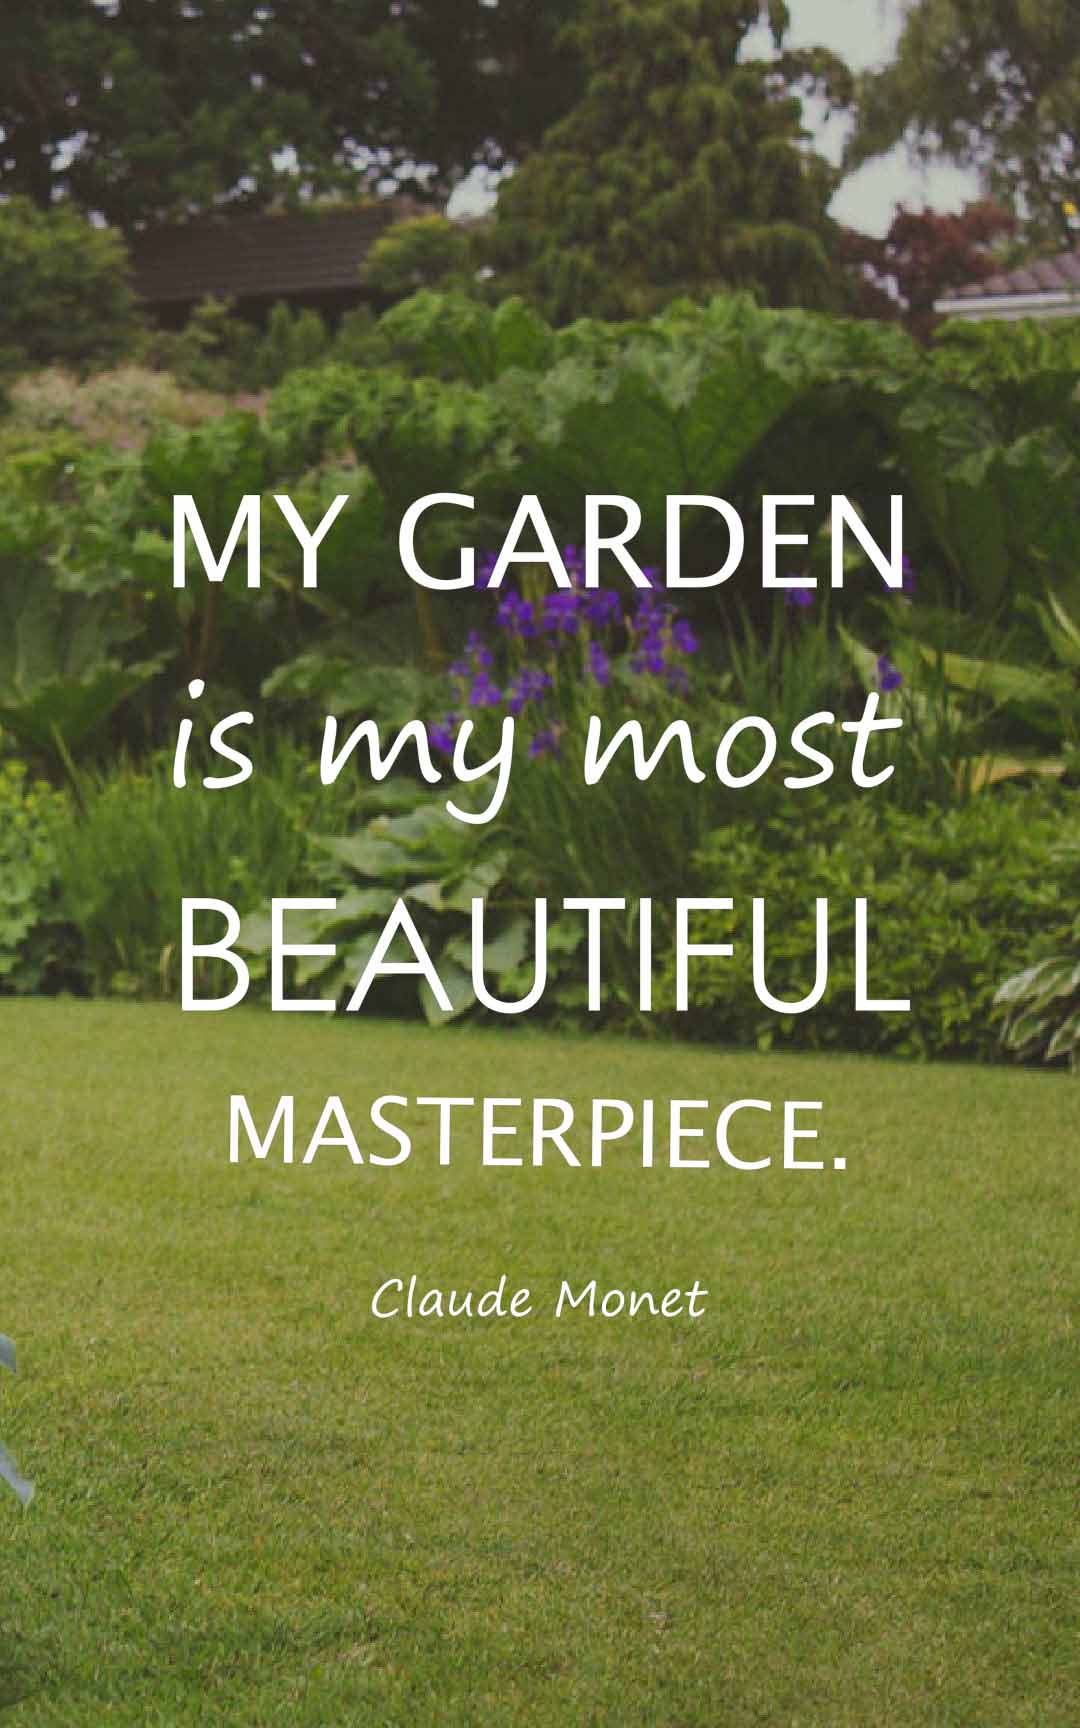 Top 50 Gardening Quotes and Sayings with Images